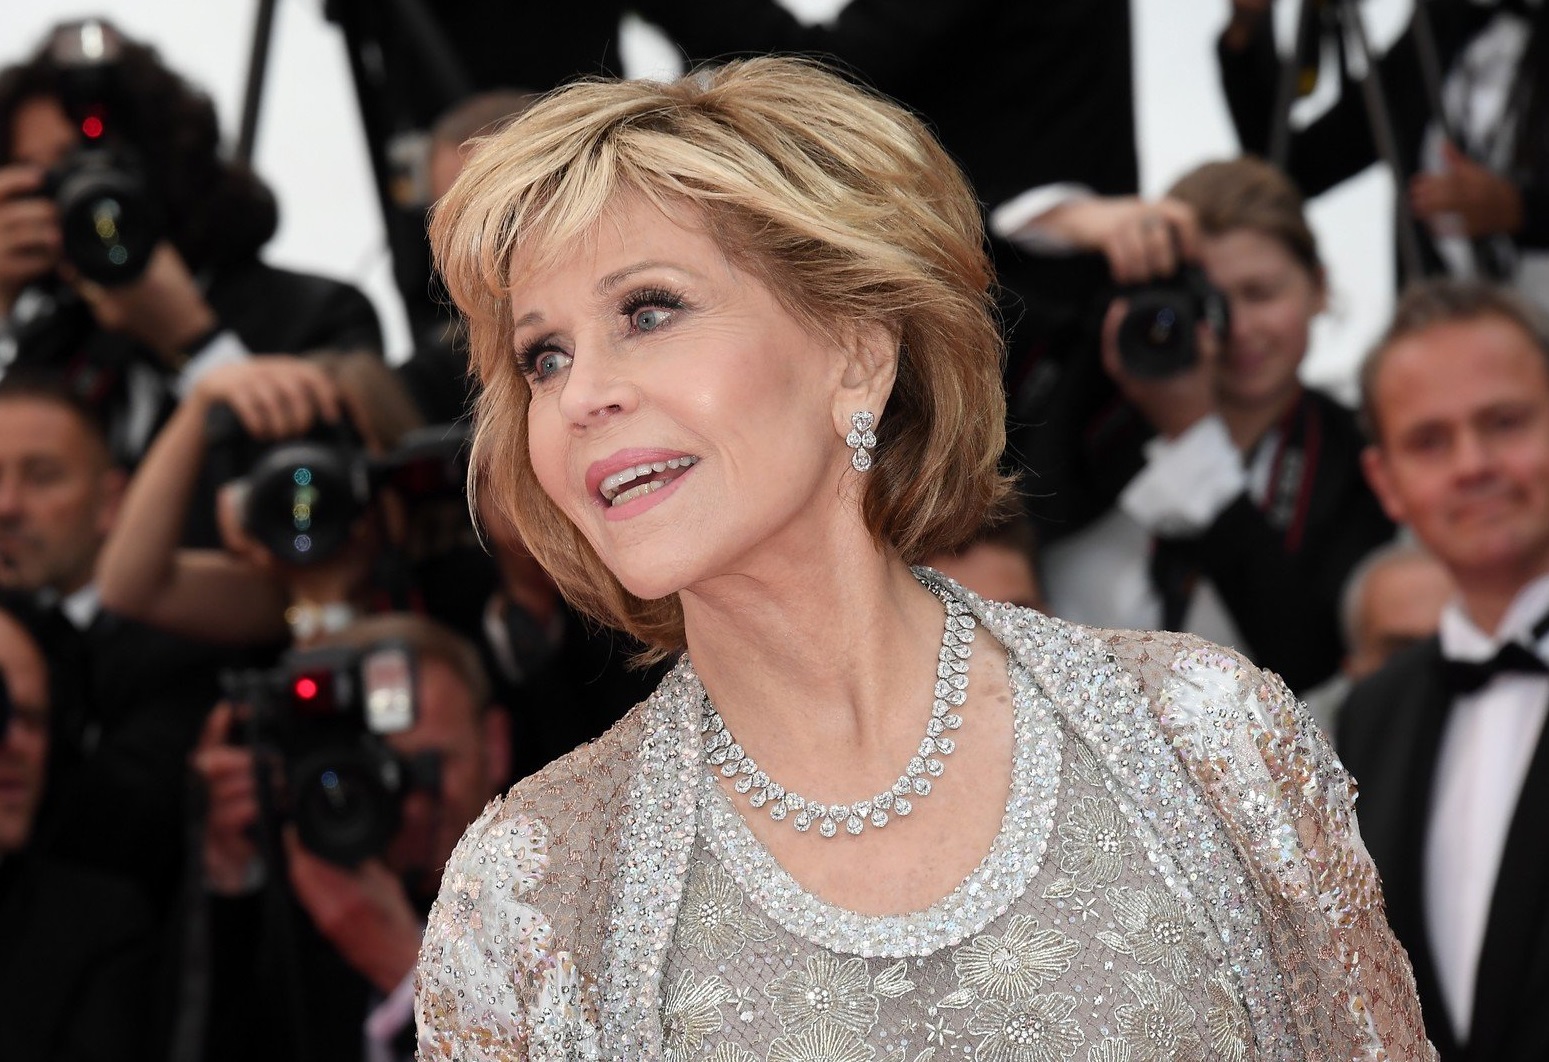 Jane Fonda 'Blackkklansman' premiere, 71st Cannes Film Festival, 14 May 2018, Image: 371776278, License: Rights-managed, Restrictions: UK and ITALY OUT - Fee Payable Upon Reproduction - For queries contact Avalon.red - sales@avalon.red London: +44 (0) 20 7421 6000 Los Angeles: +1 (310) 822 0419 Berlin: +49 (0) 30 76 212 251 Madrid: +34 91 533 4289, Model Release: no, Credit line: Profimedia, Uppa entertainment